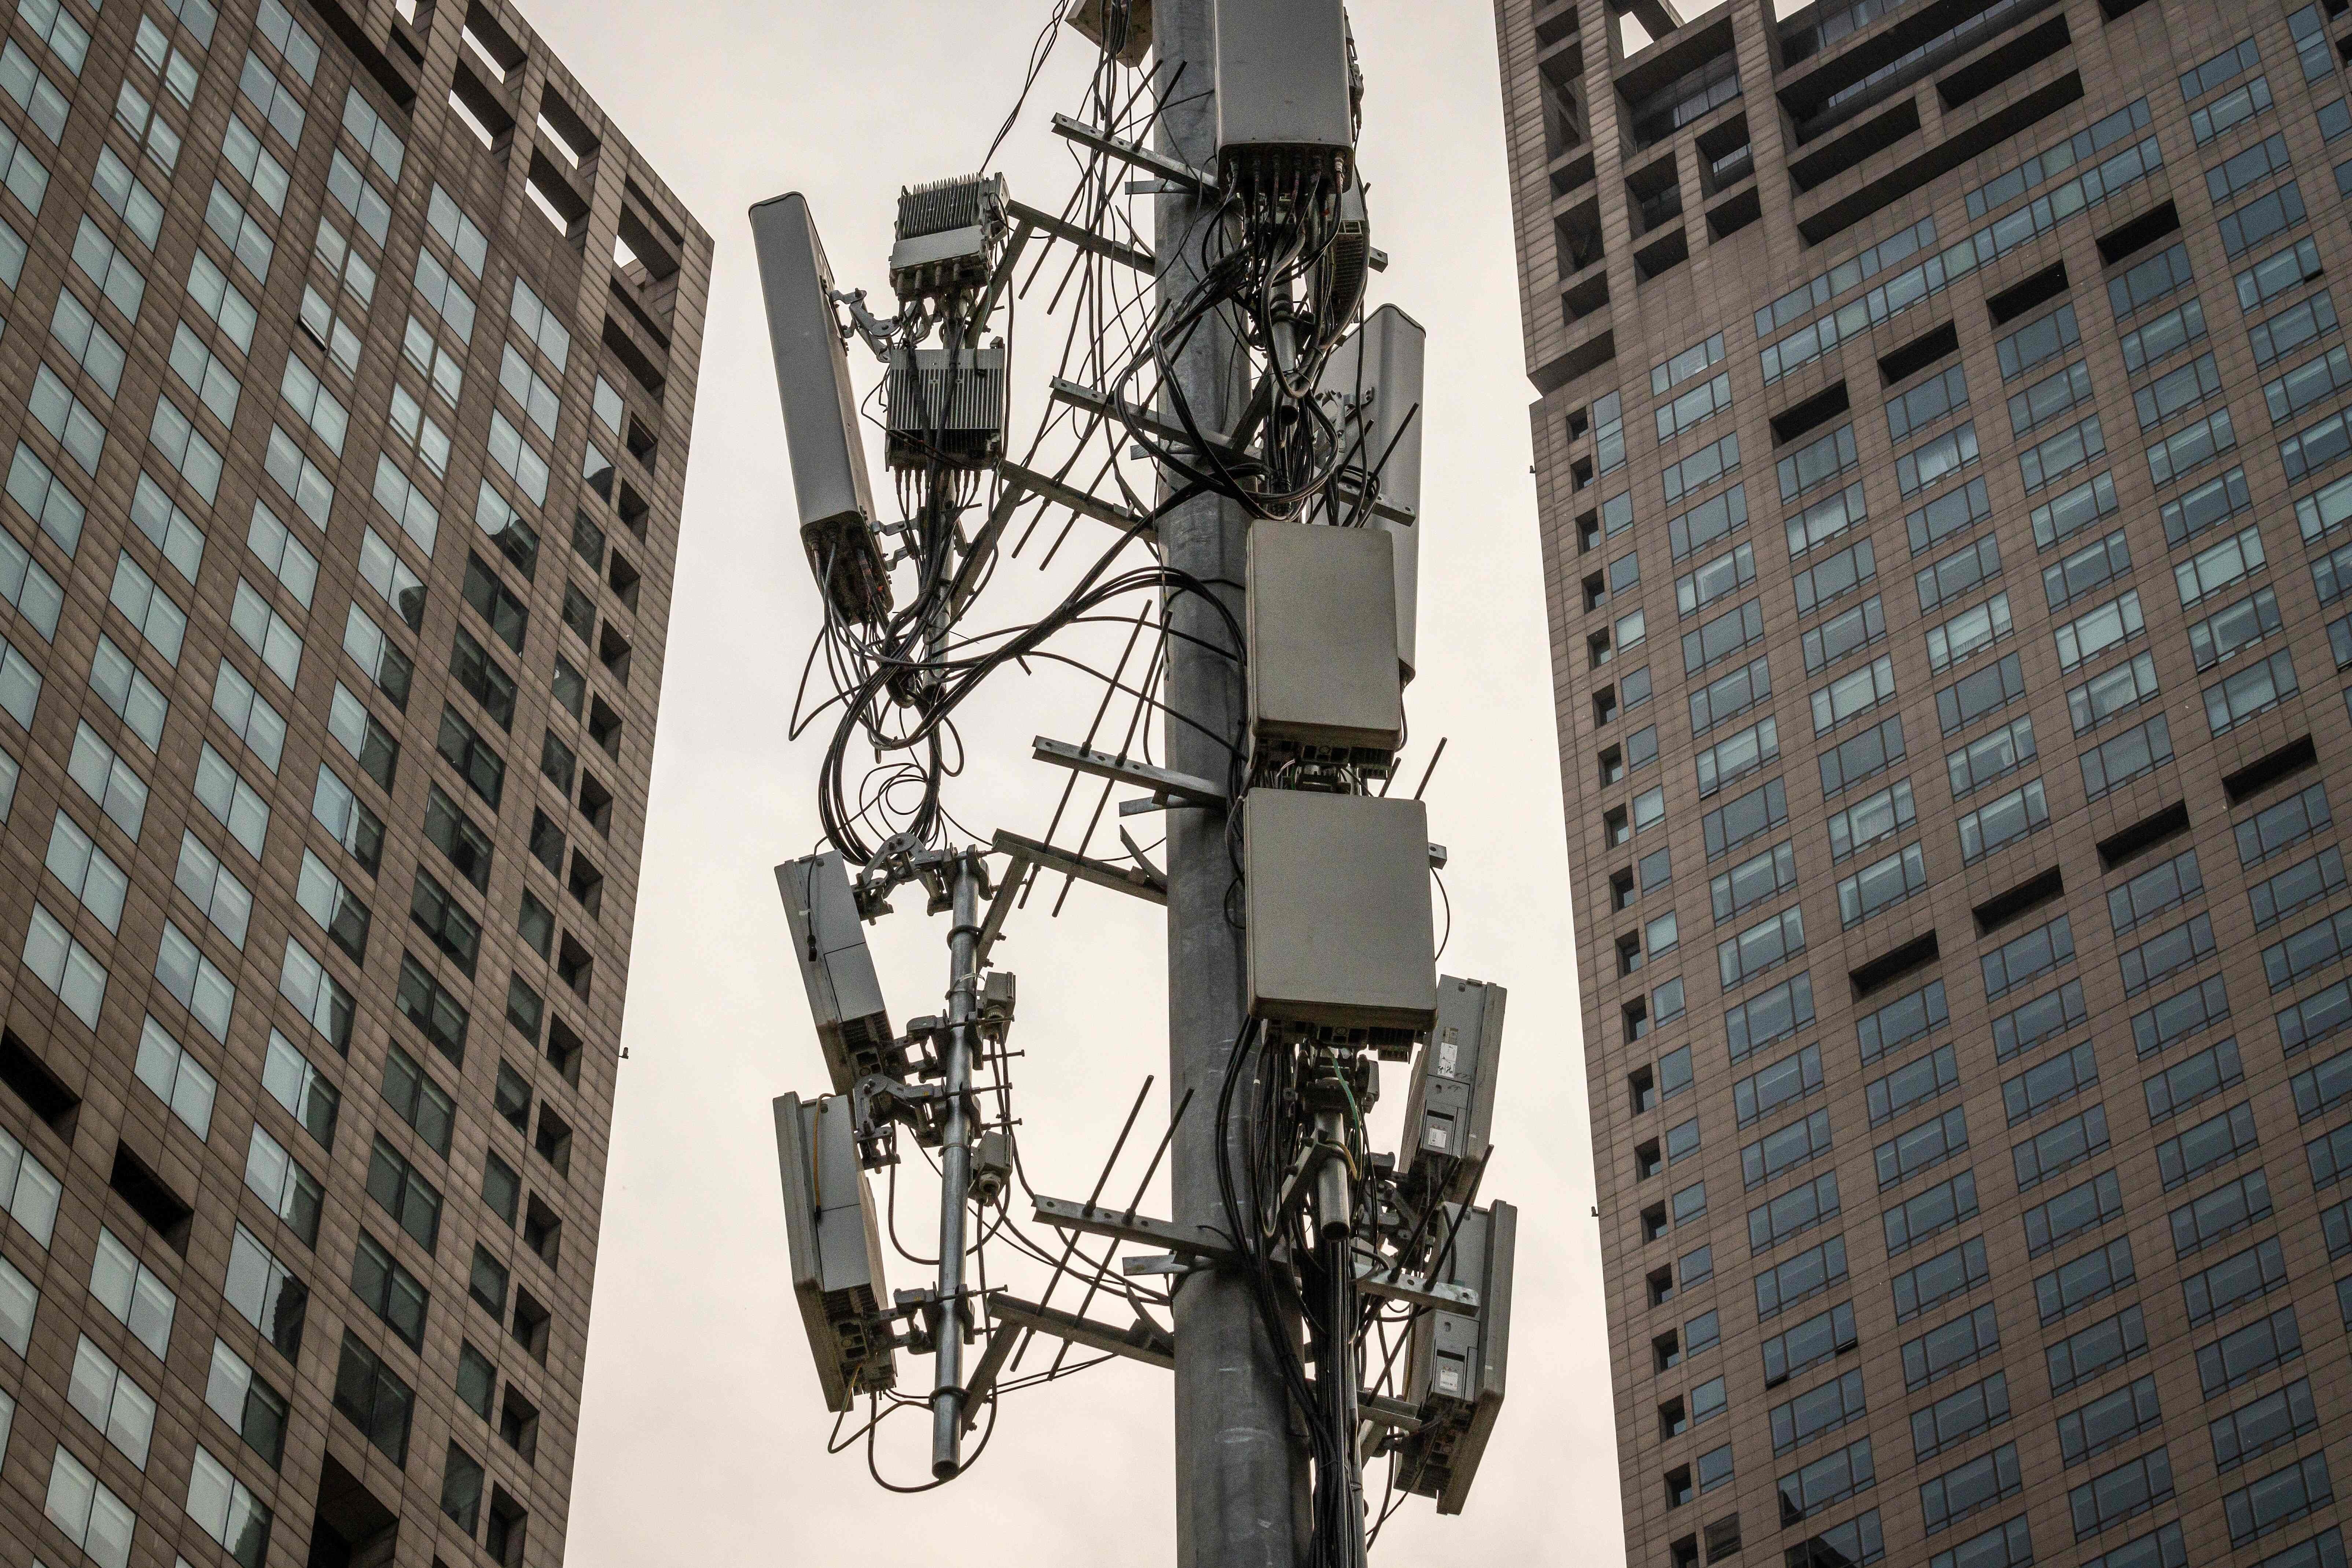 A 5G network tower on a street in Beijing on April 7. So-called new infrastructure such as 5G, smart power transmission and high-speed railways are expected to replace highways, airports and other traditional forms of infrastructure as investment targets in China’s next five-year plan. Photo: AFP